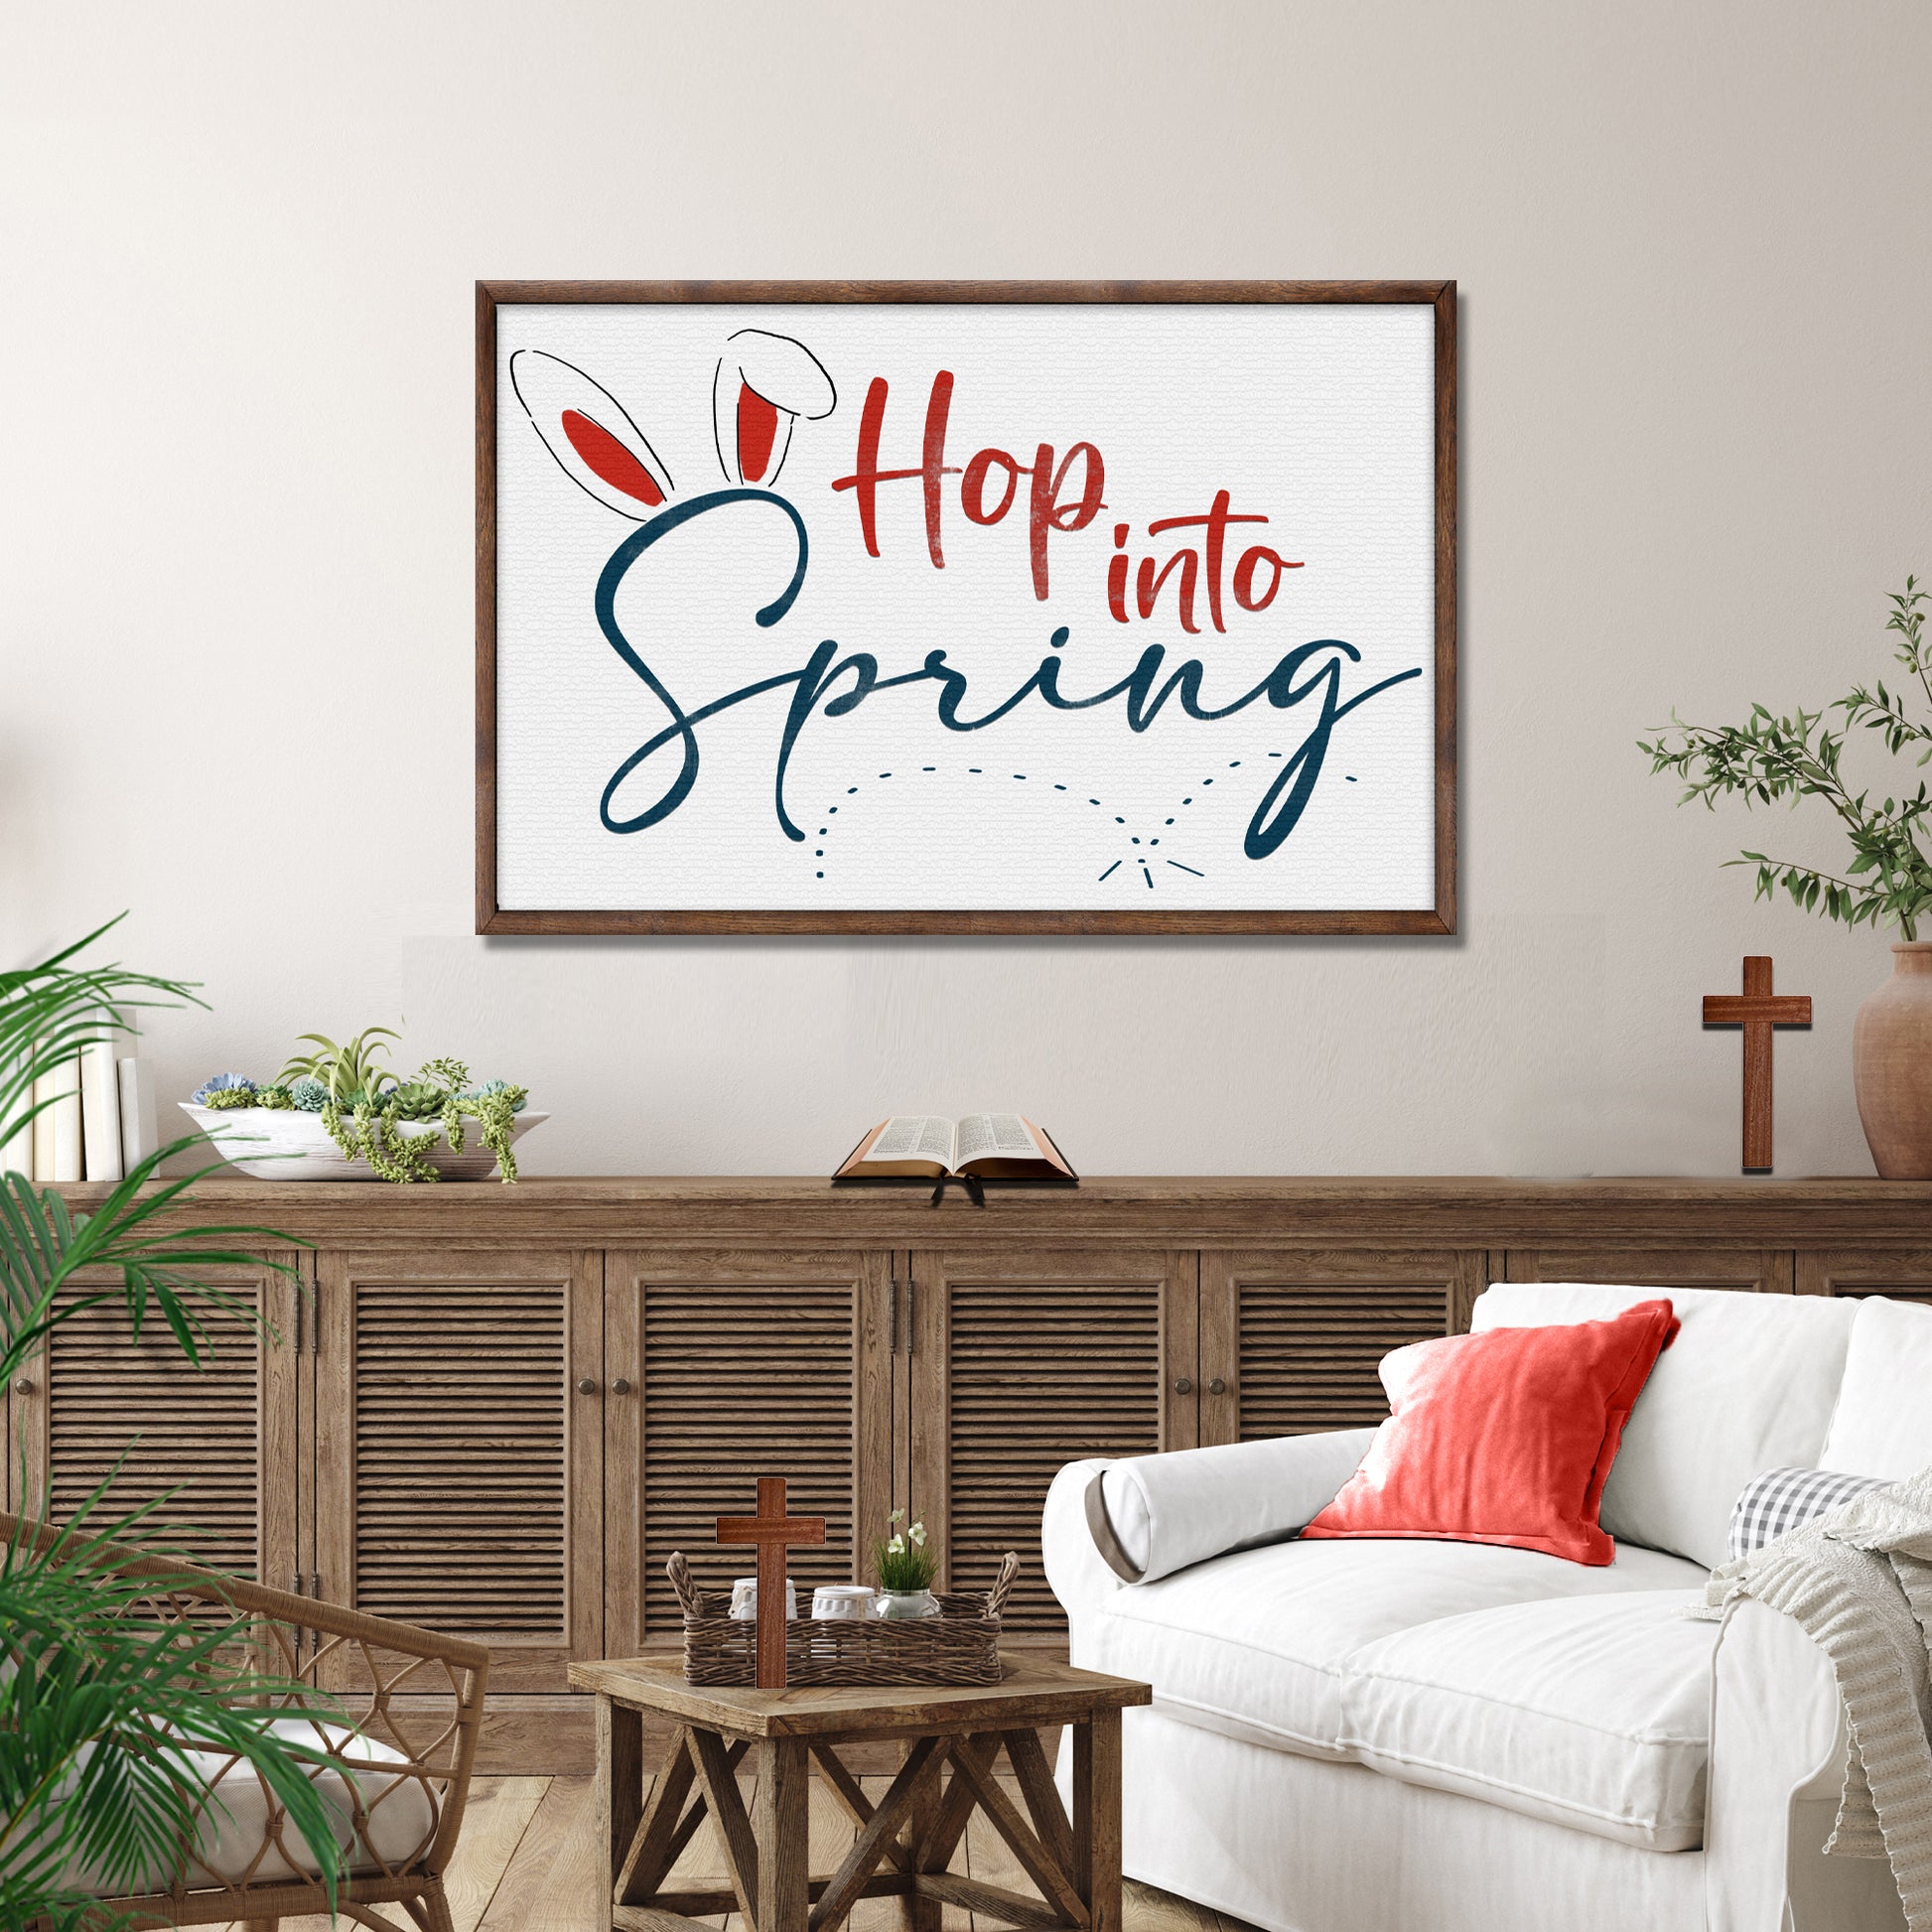 Hop Into Spring Sign - Image by Tailored Canvases